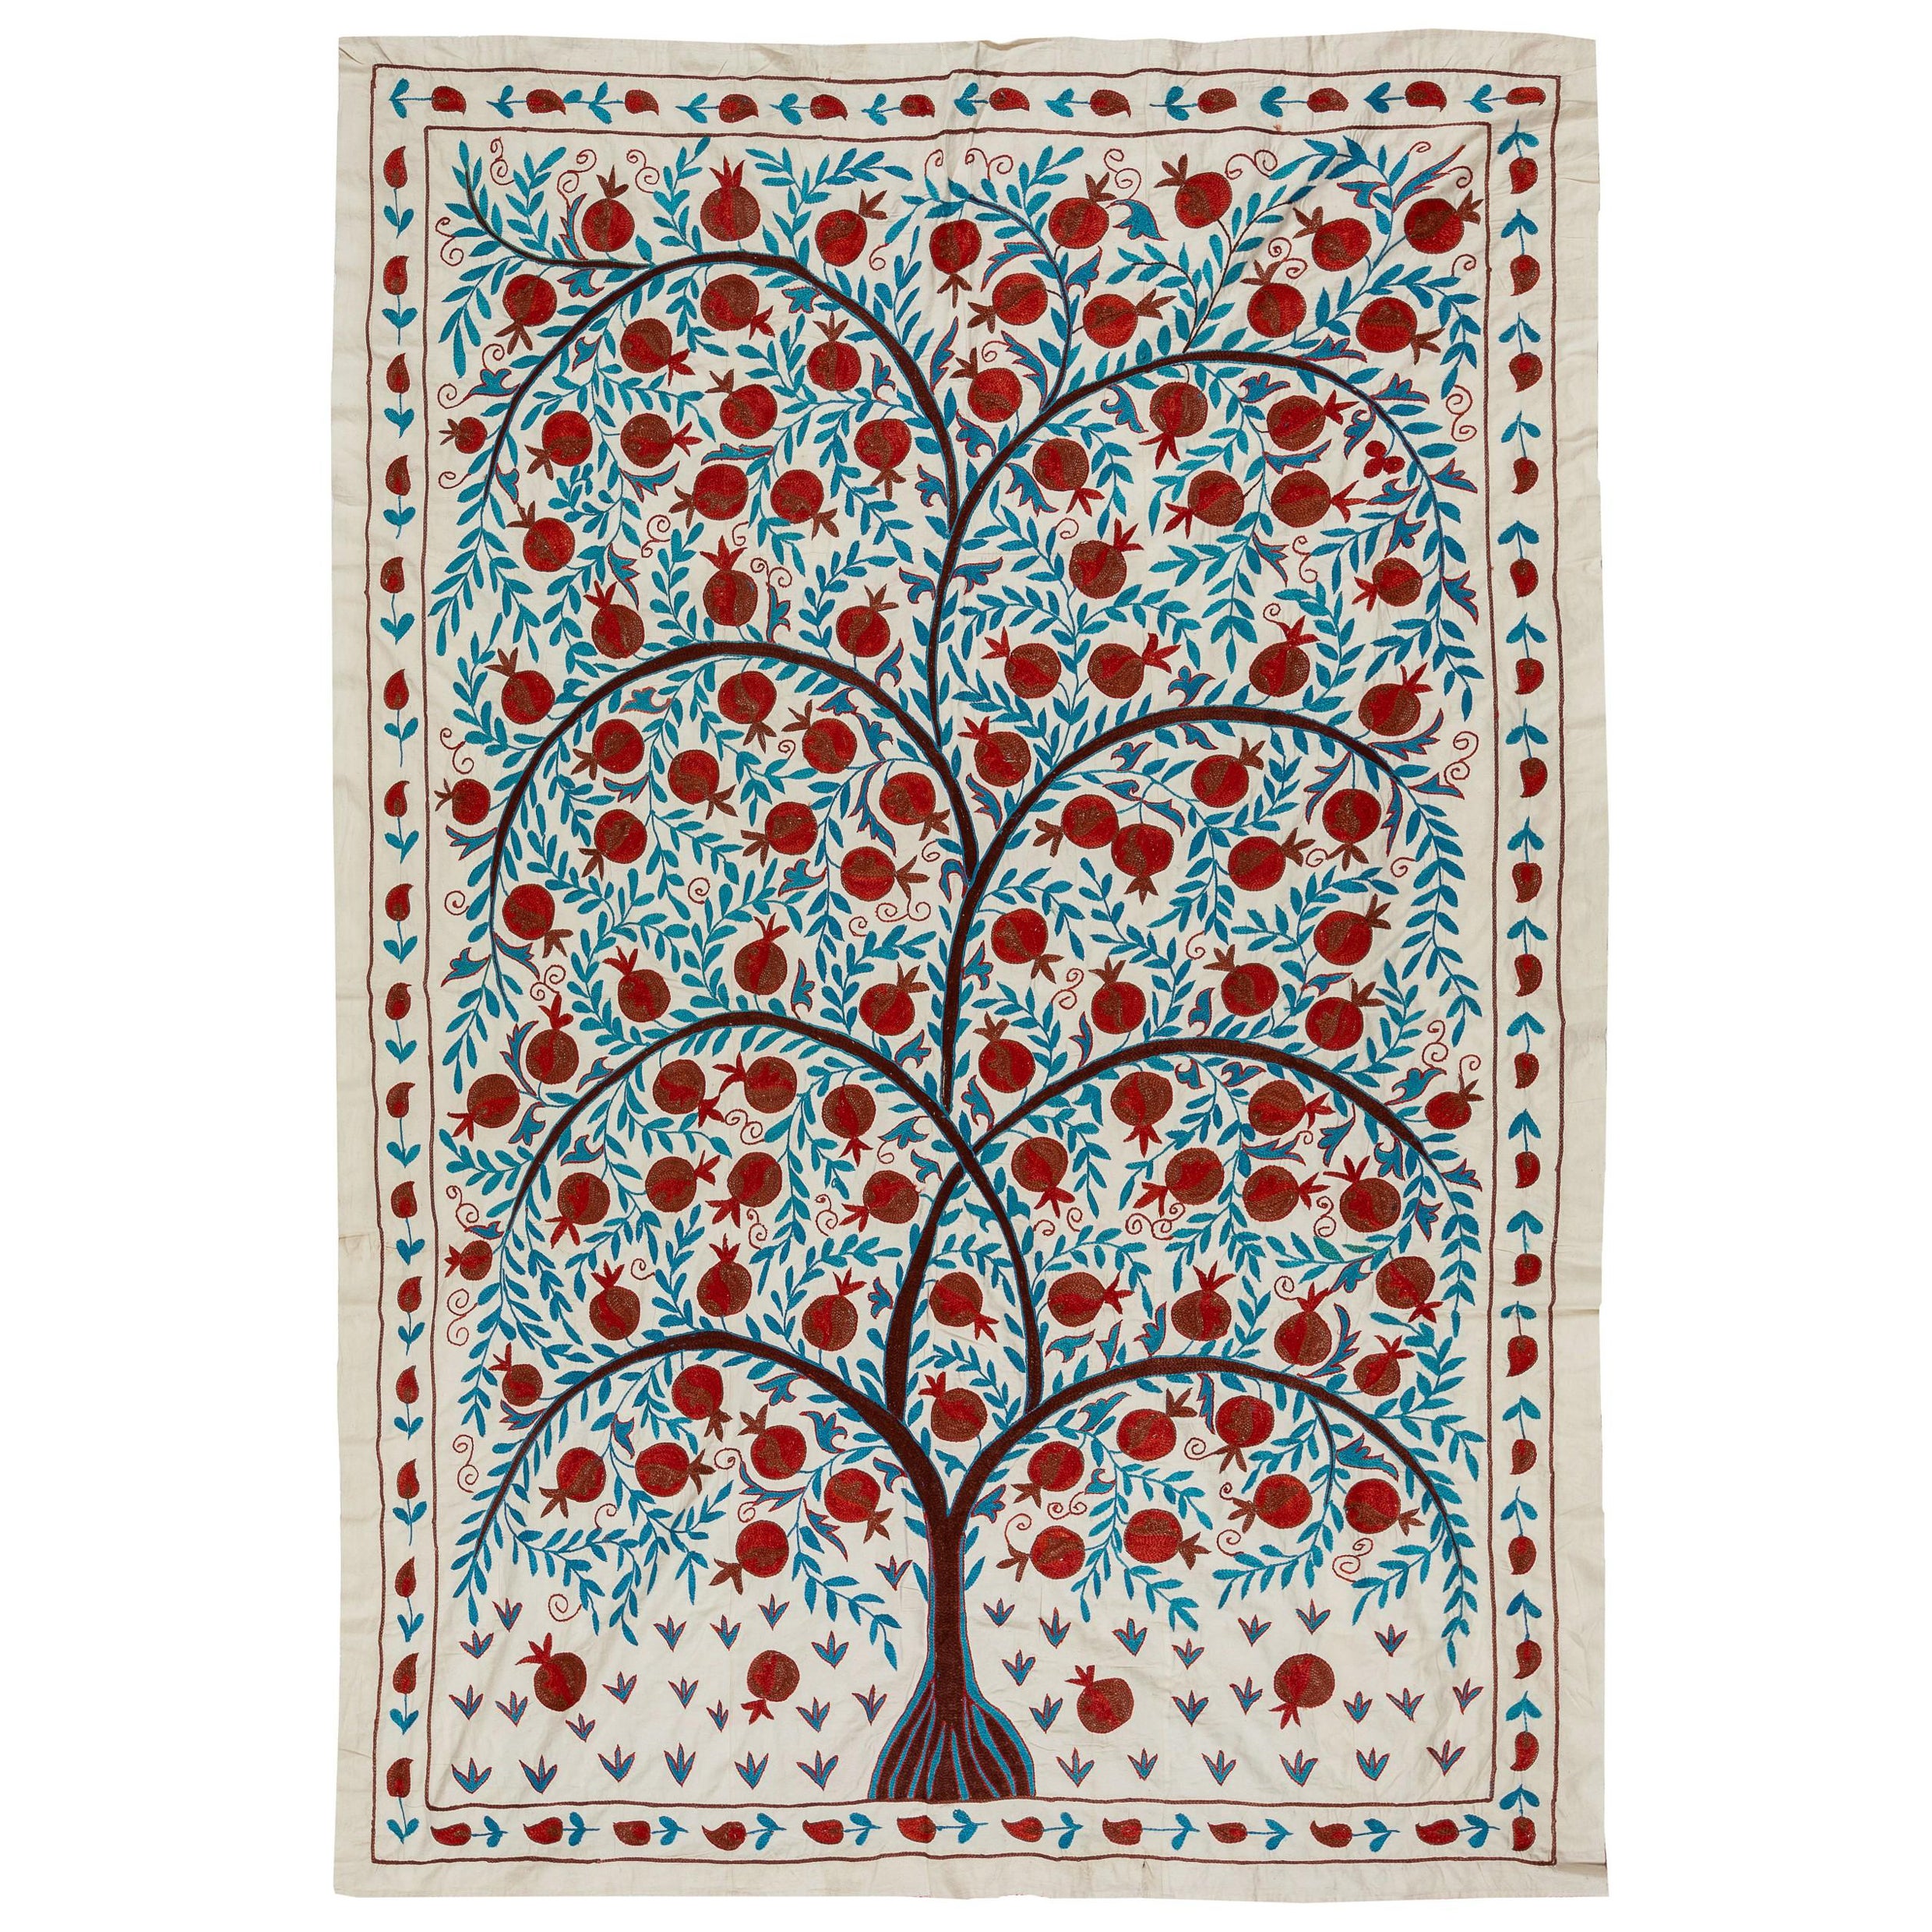 4.7x7 ft Pomegranate Tree Design Suzani Wall Hanging, Silk Embroidery Bedspread